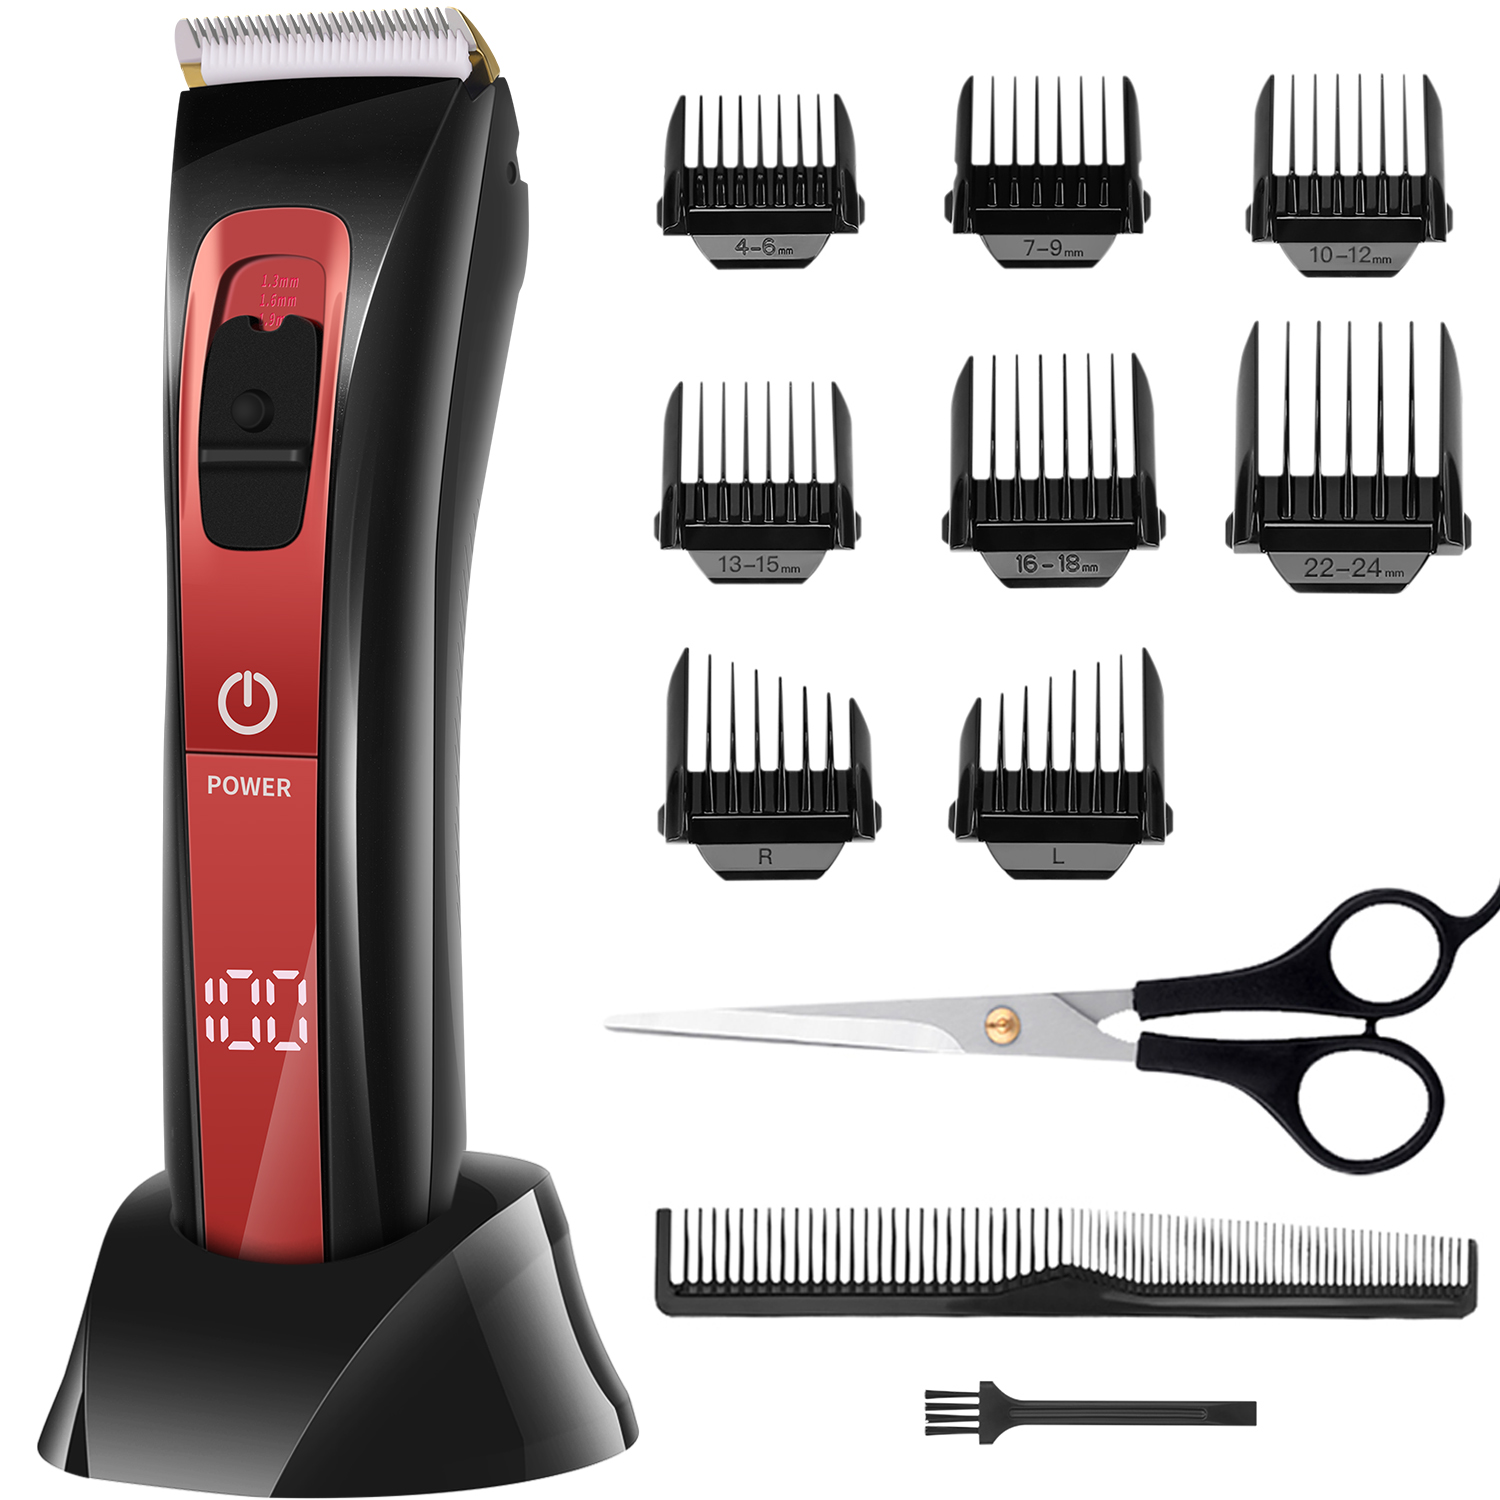 Professional Powerful LED Electric Hair Clipper For Men Washable Hair  Trimmer Kit Cord Cordless Adjustable Salon Haircut Home|Hair Clippers|  AliExpress | [13 In 1] Cordless Hair Clipper Electric Hair Shaver |  